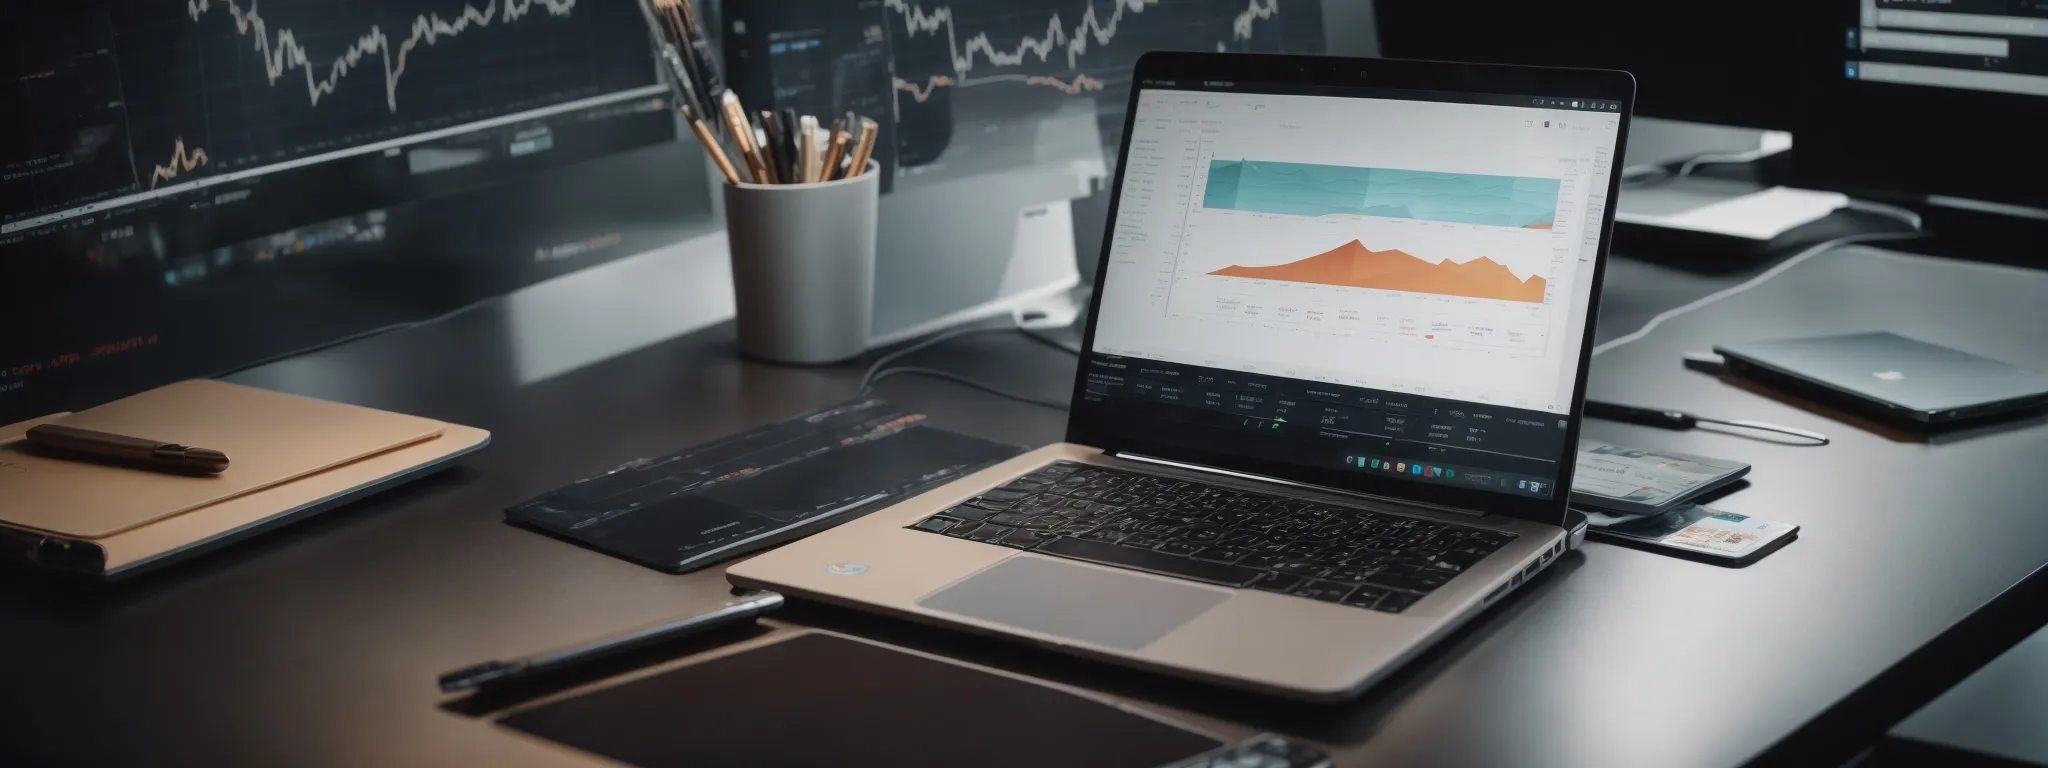 a laptop with charts and graphs on the screen, reflecting modern seo analytics tools.